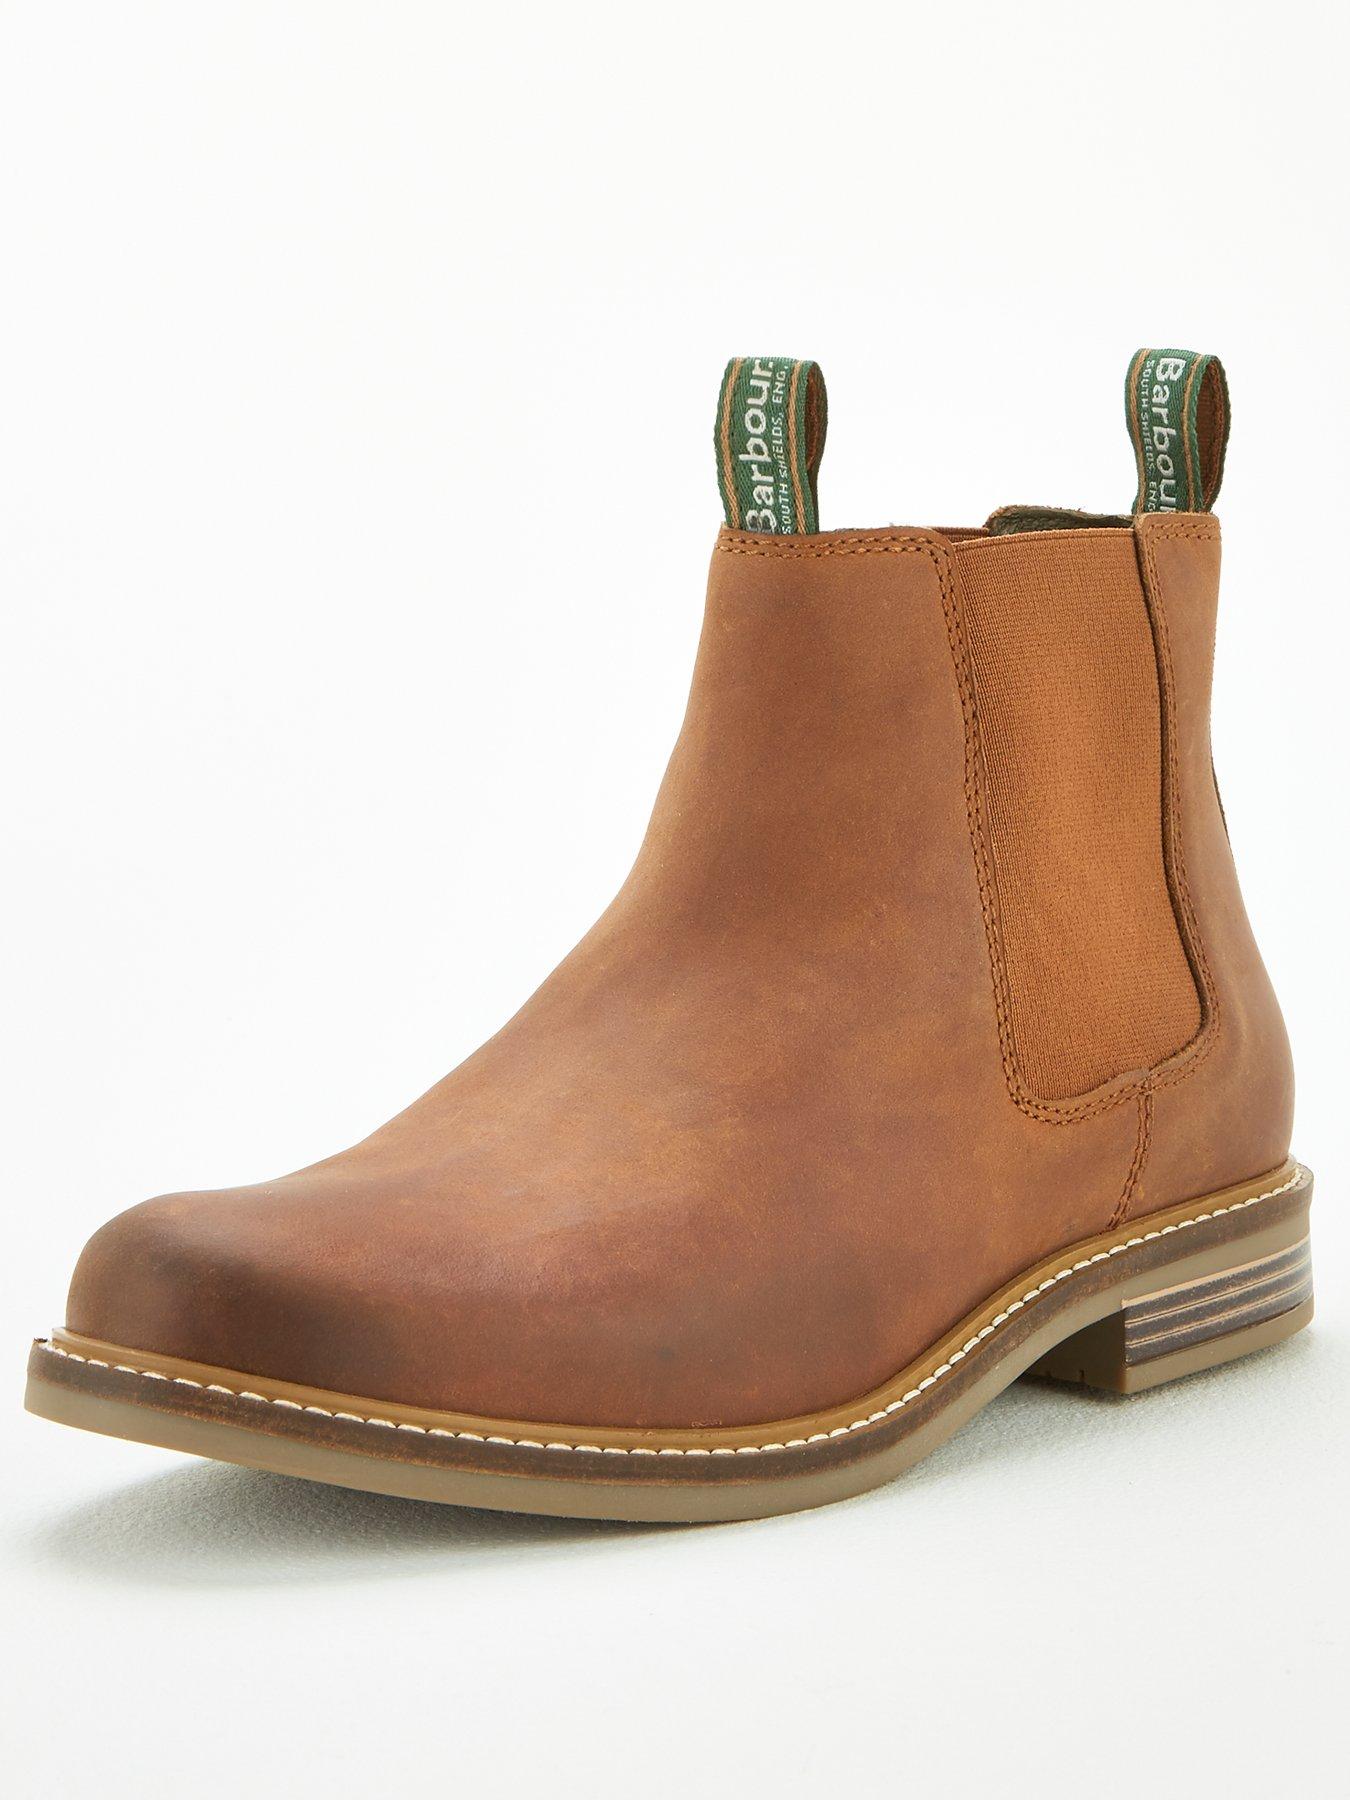 Barbour Farseley Chelsea Boots - Tan | very.co.uk